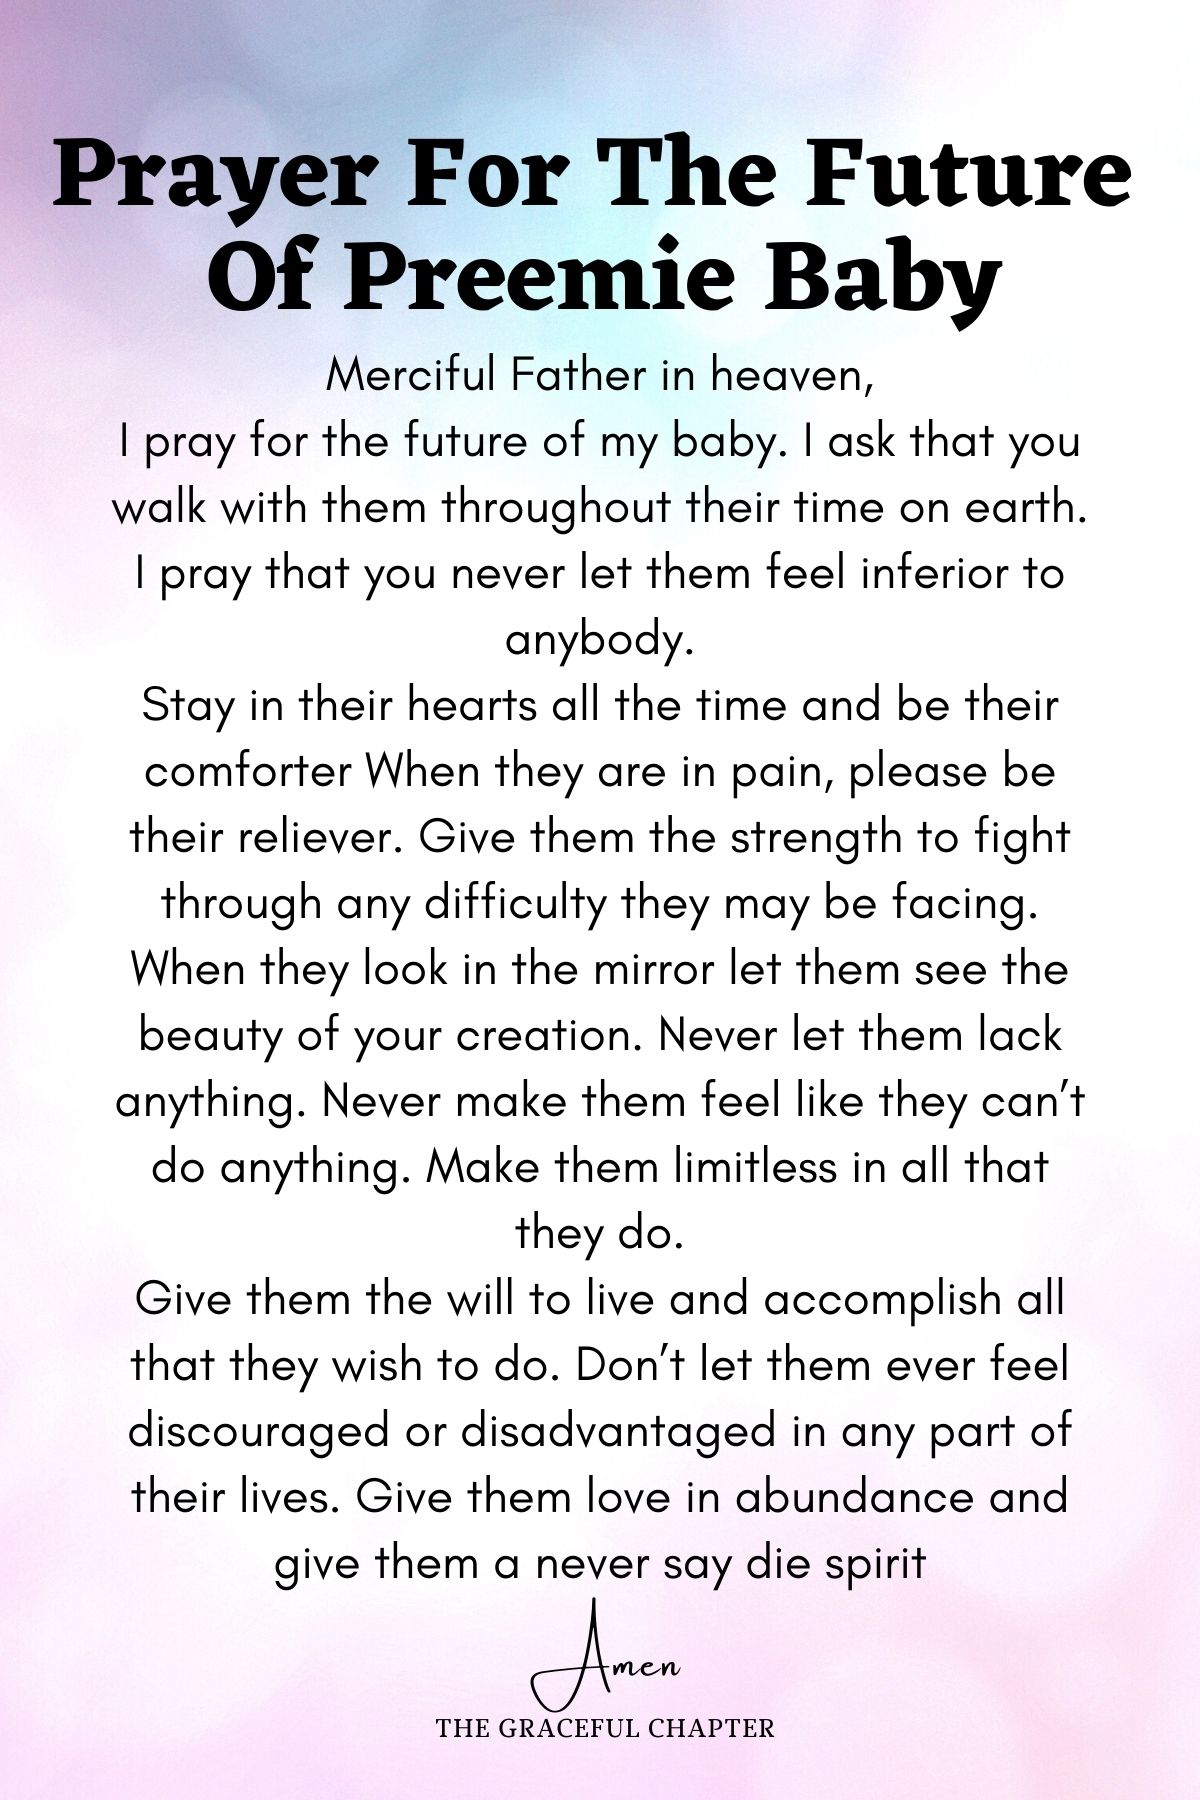 Prayer for the future of preemie baby